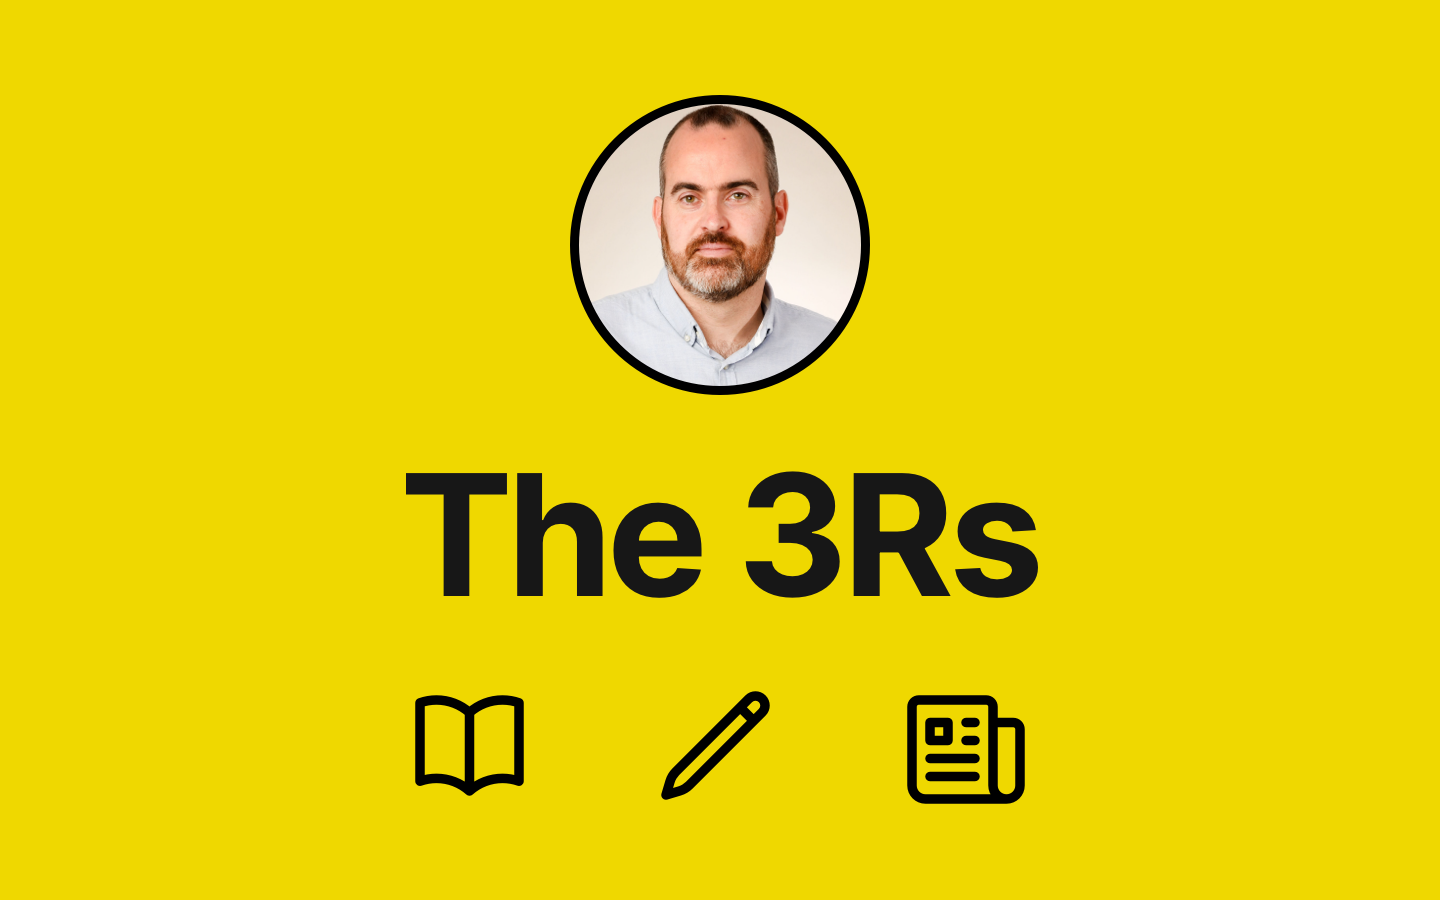 The 3Rs: What I'm reading, (w)riting, & the research I'm interested in - Issue #6 feature image